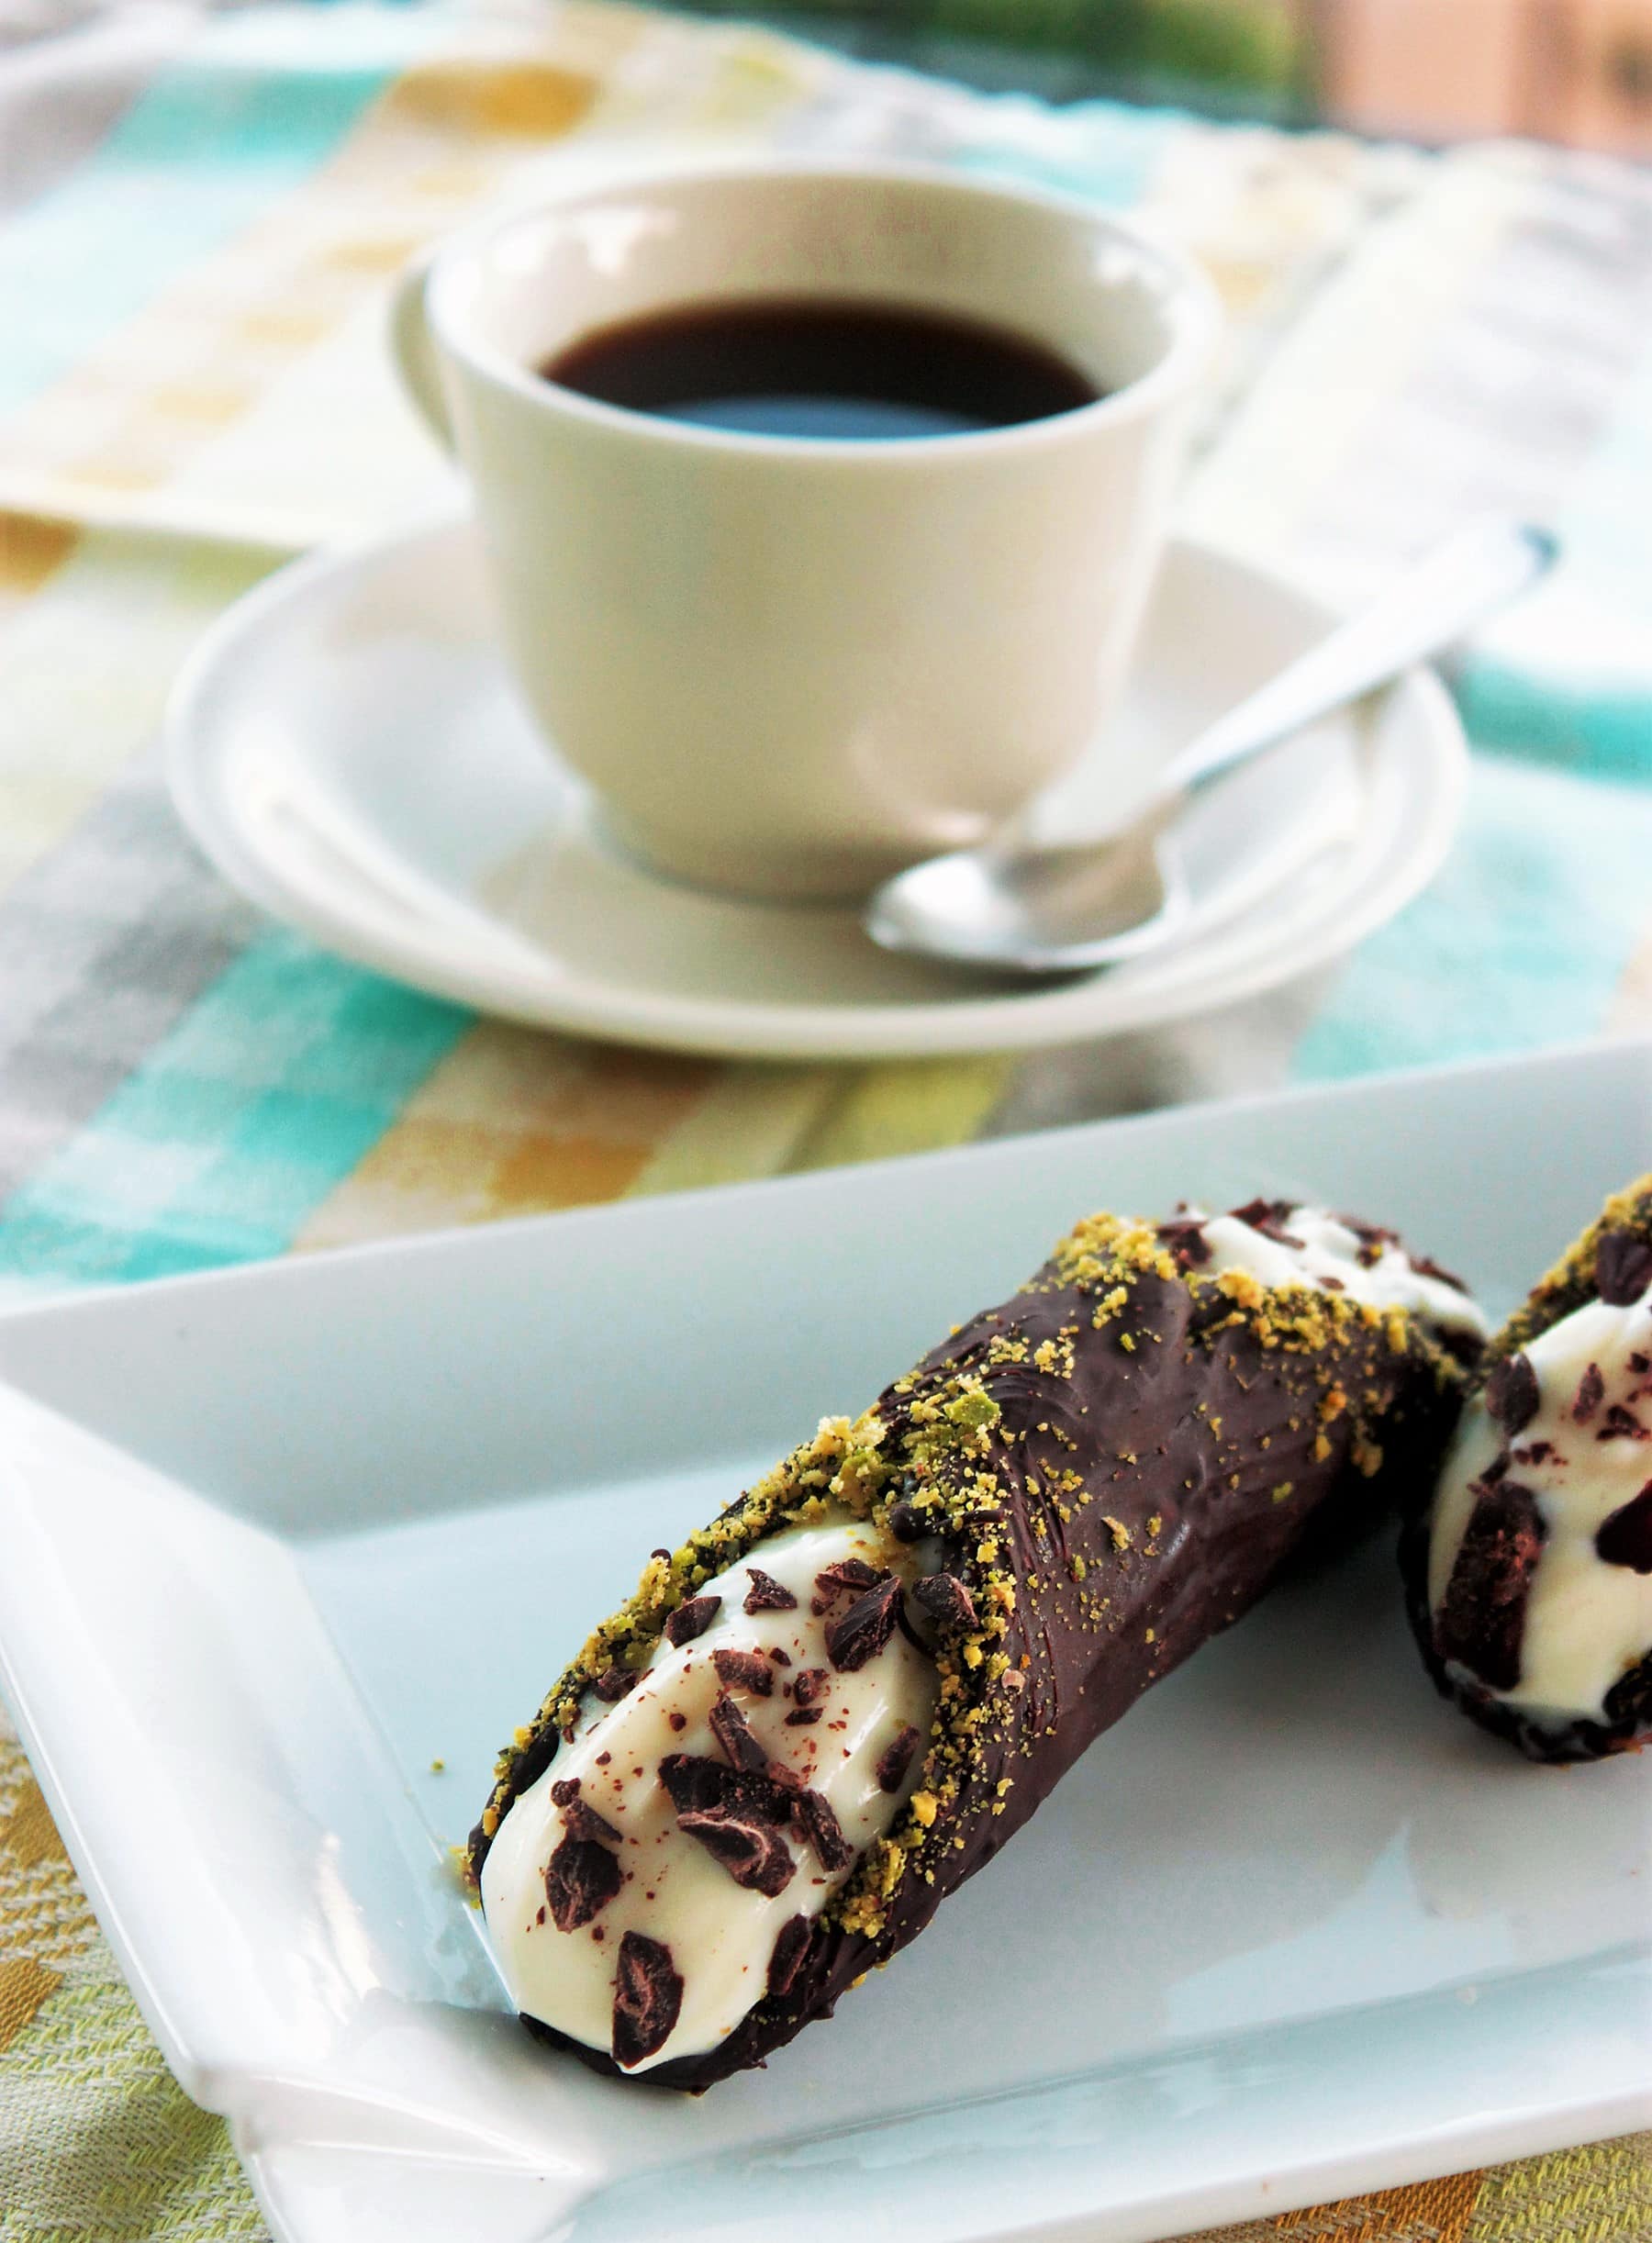 A sweet fried crispy dough dipped in dark chocolate and filled with the most fresh citrusy ricotta cheese, bits of dark chocolate and pistachios. The most famous Sicilian dessert in the world! Recipe from The Petite Cook